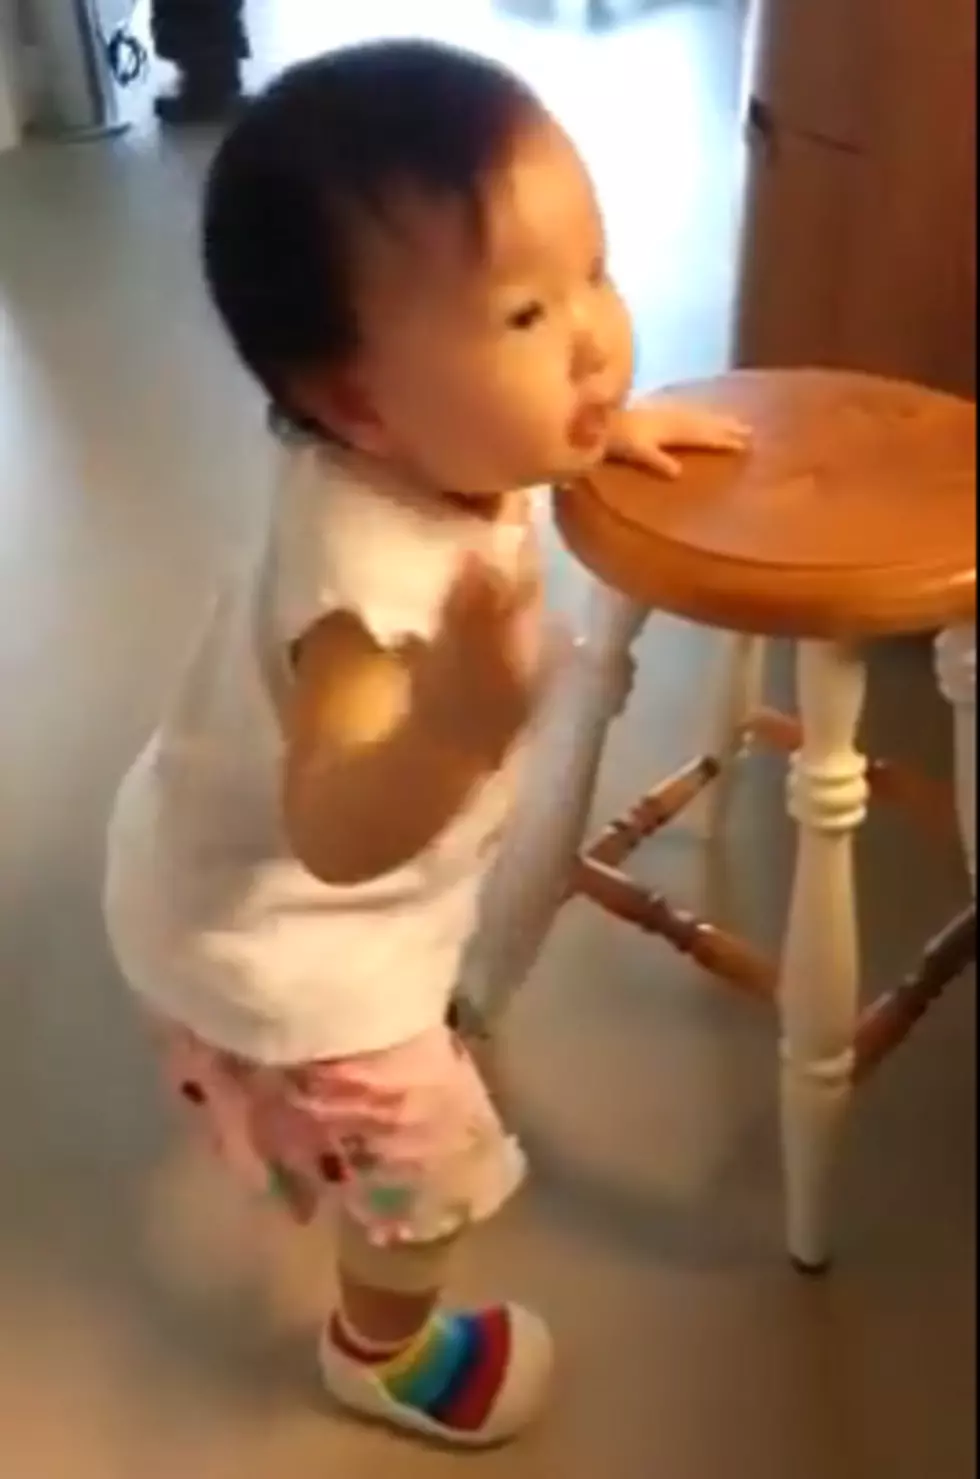 Baby ‘Gangnam Style’ Featuring an 11-Month-Old Named Leah [VIDEO]